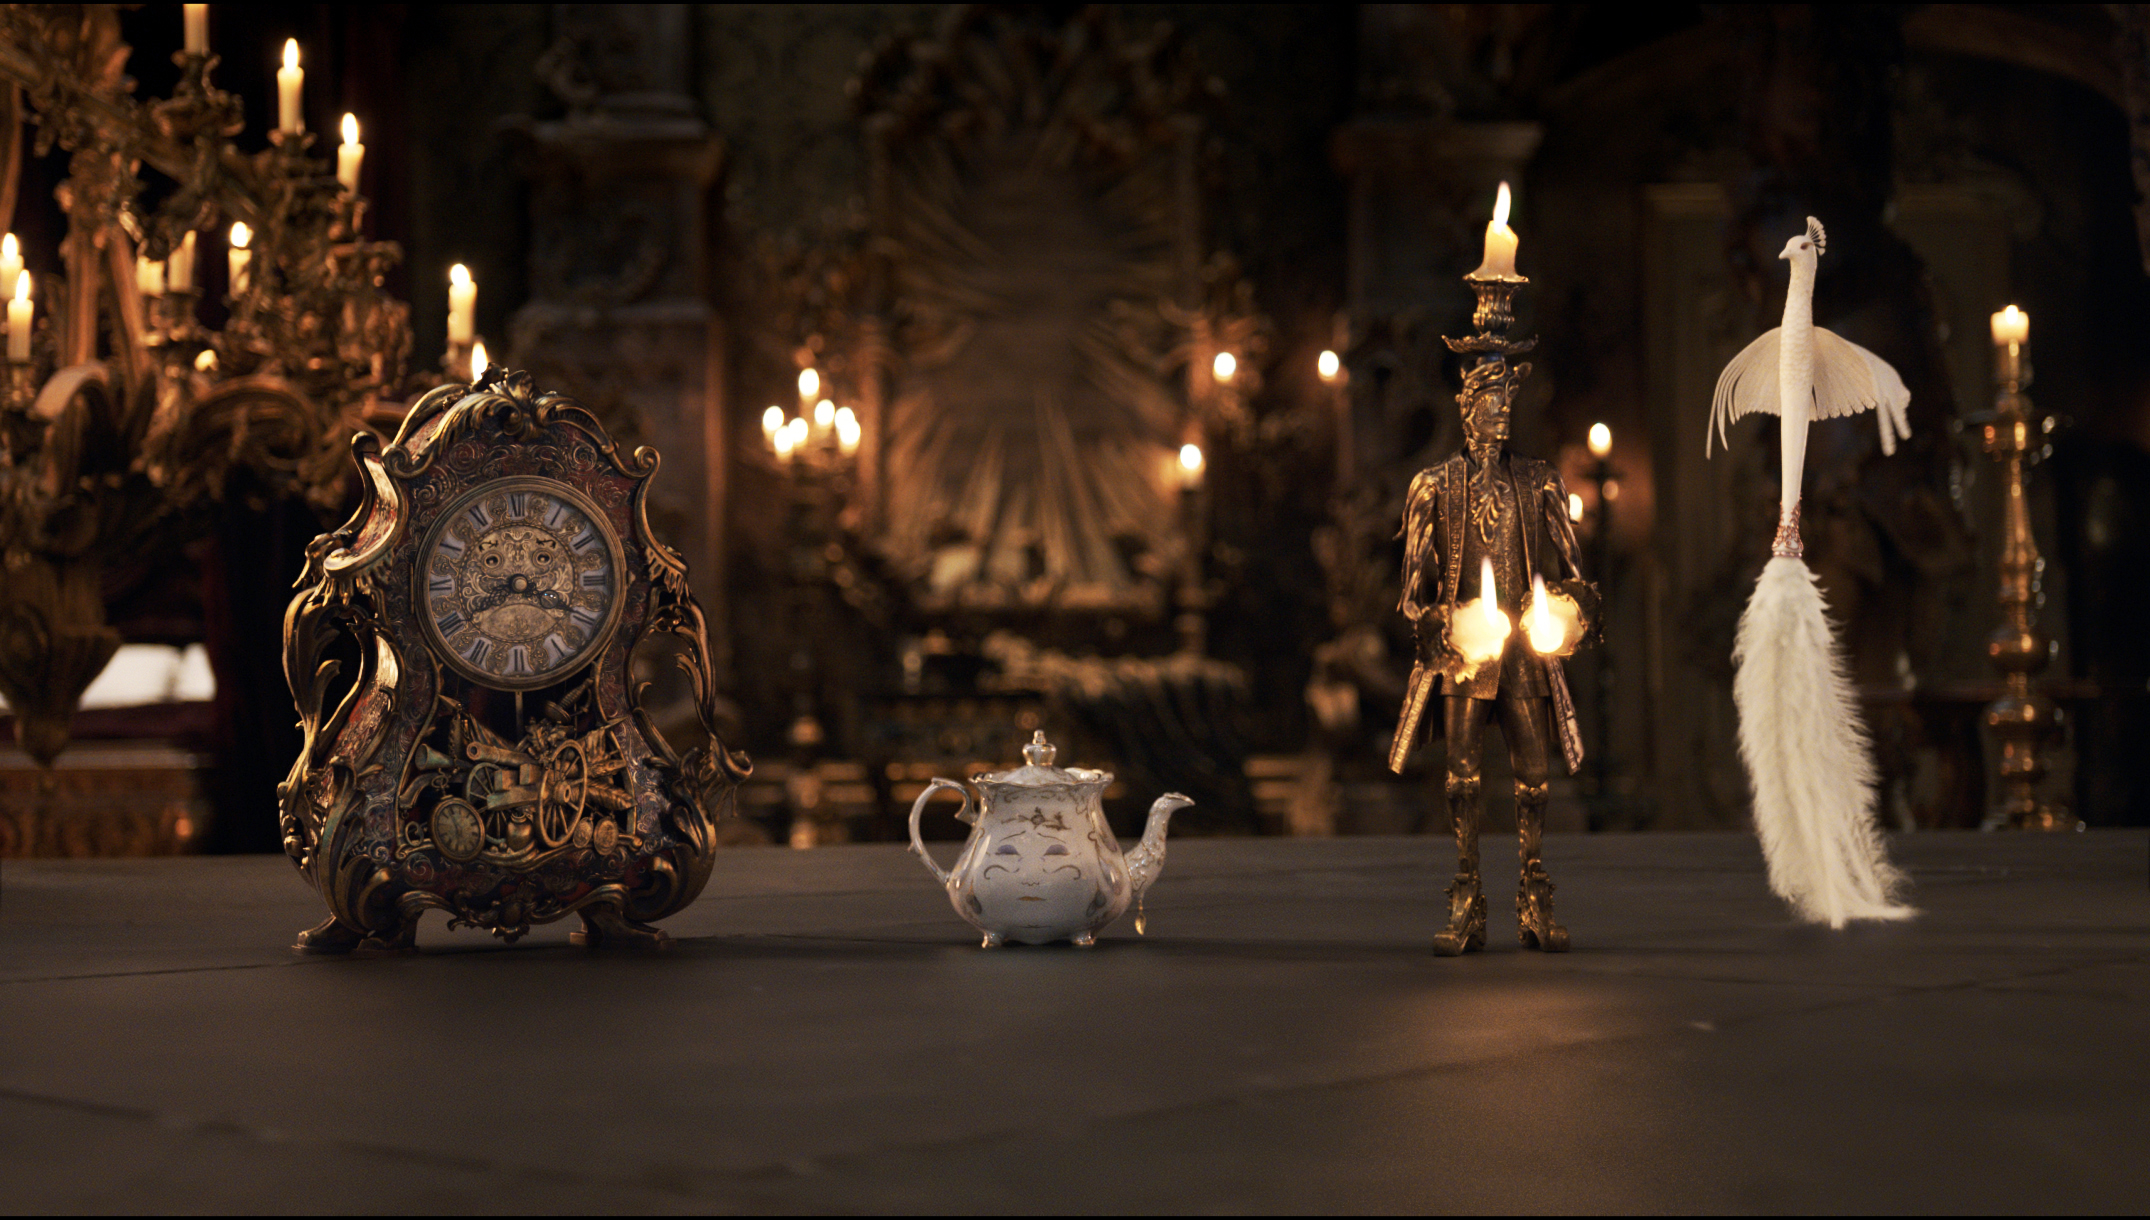 New Images From the Live-Action Film BEAUTY AND THE BEAST